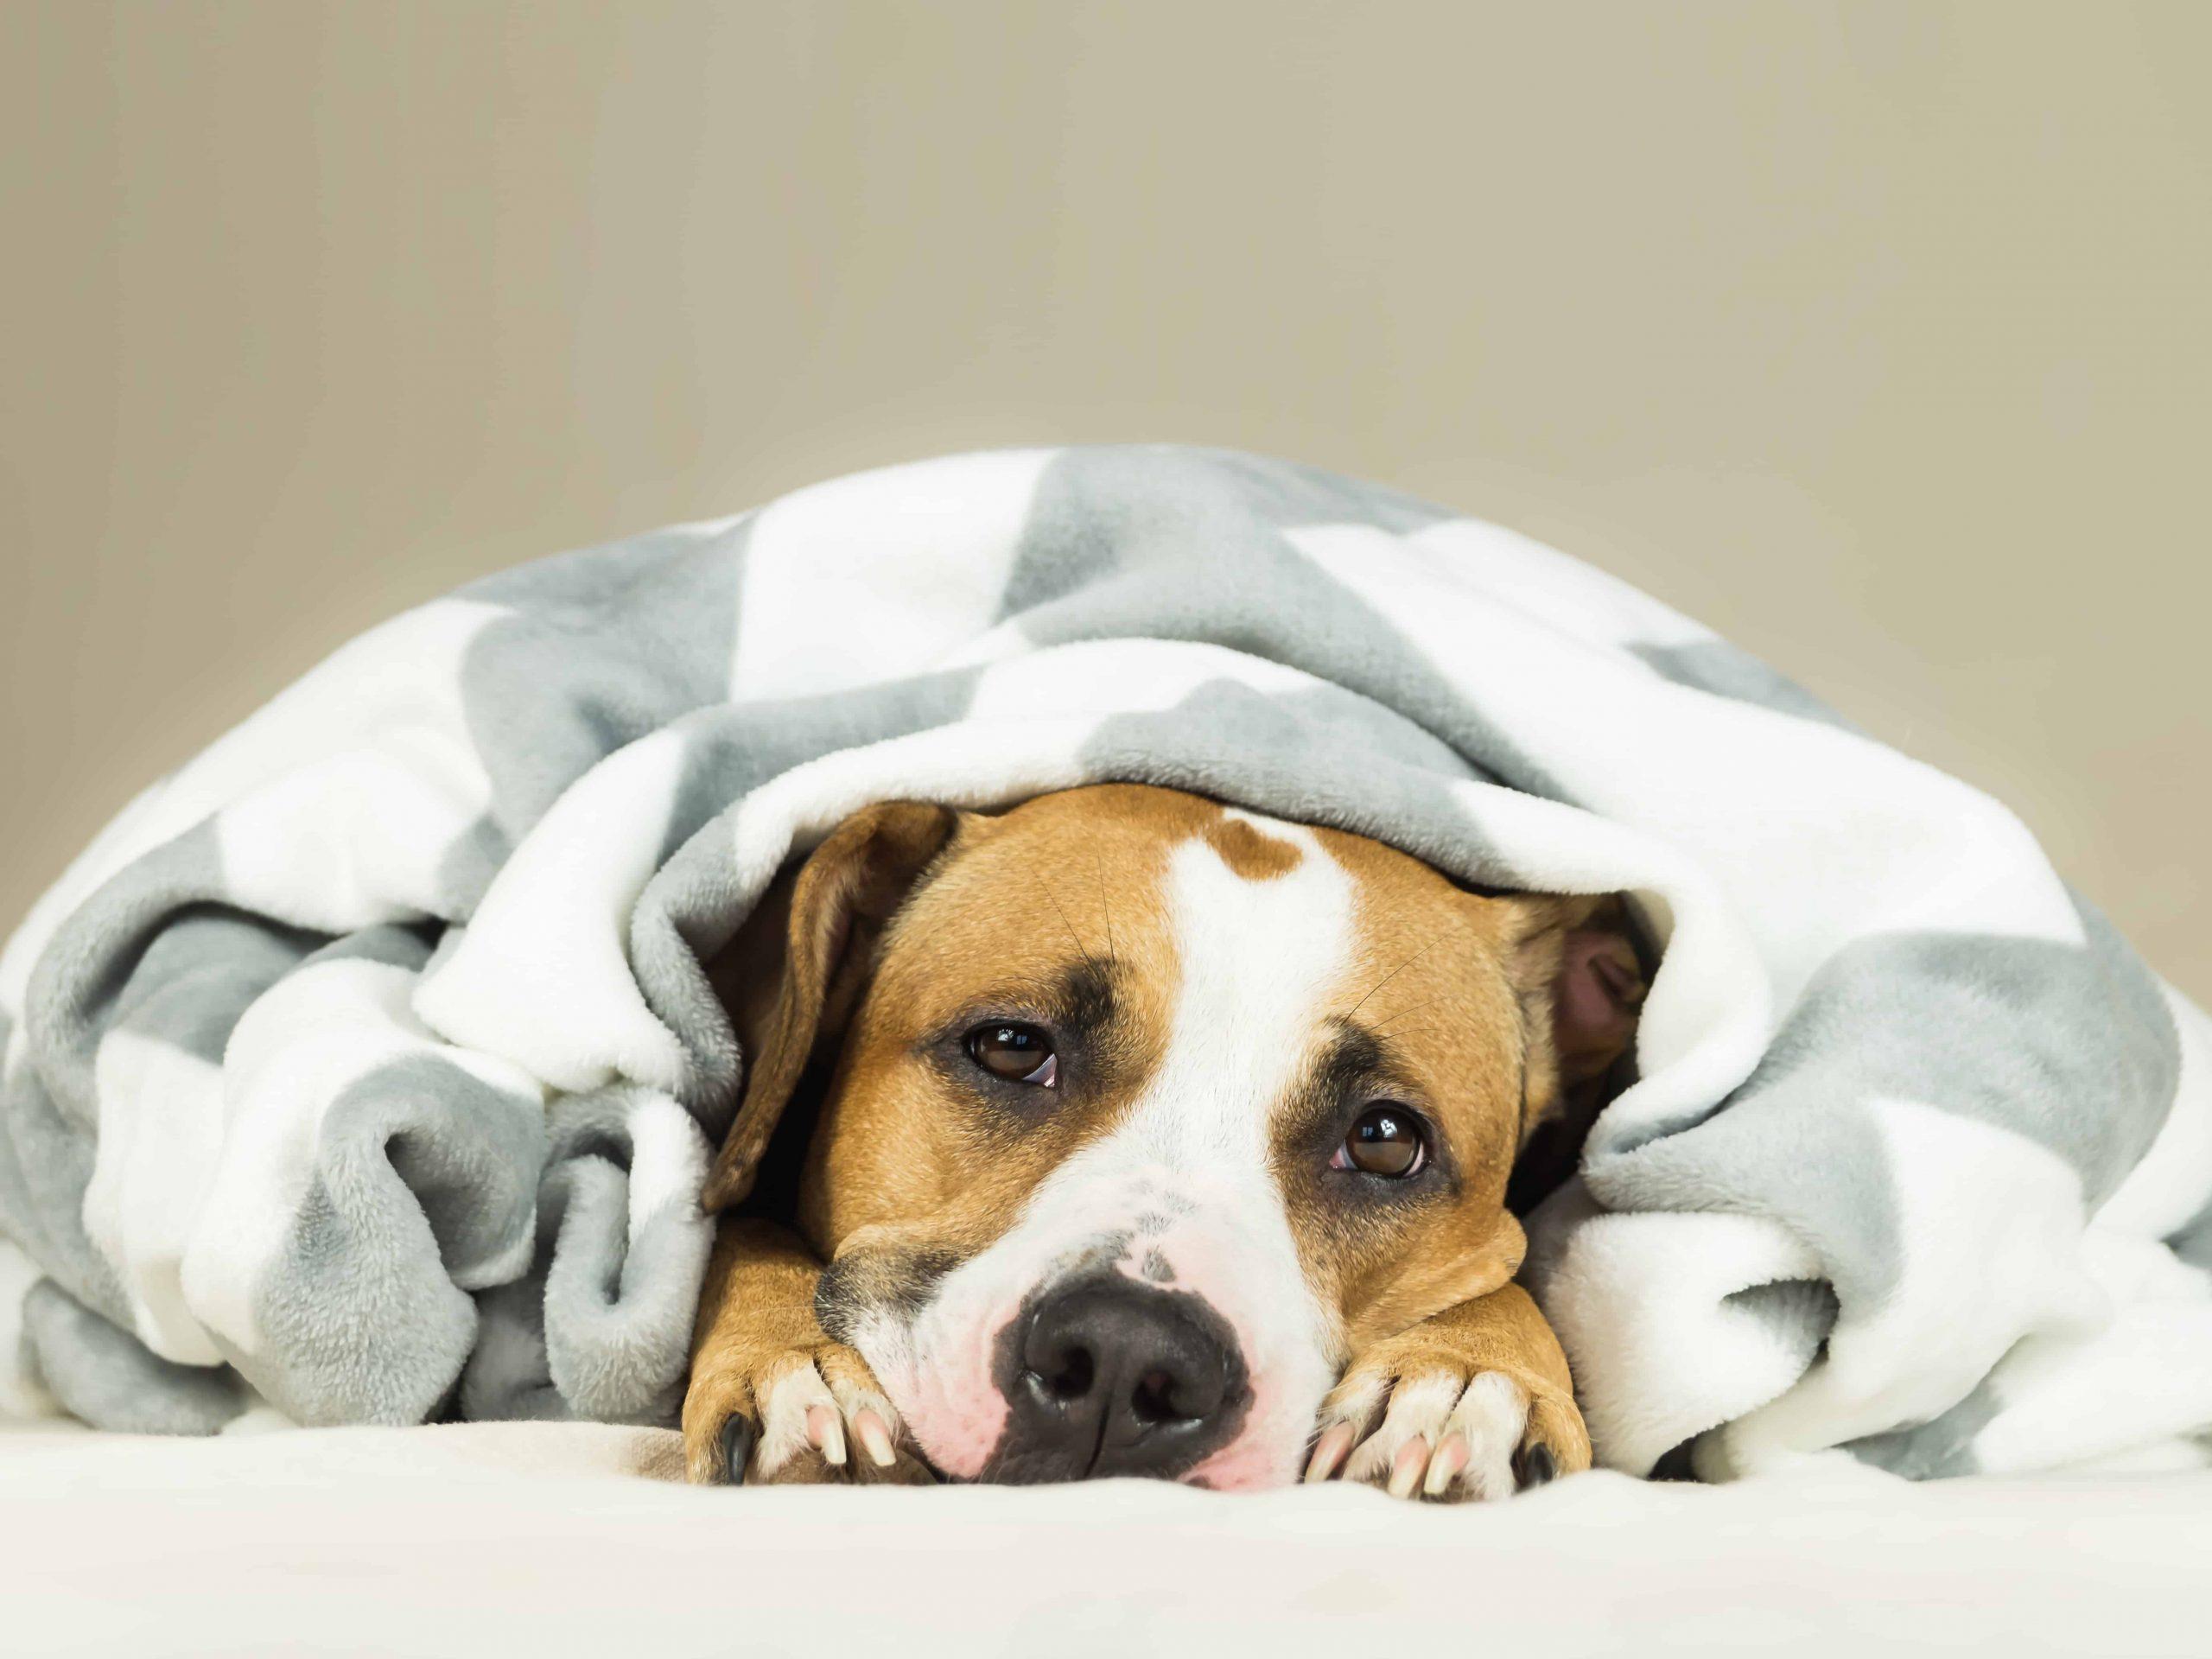 What can trigger a seizure in a dog - sleeping dog